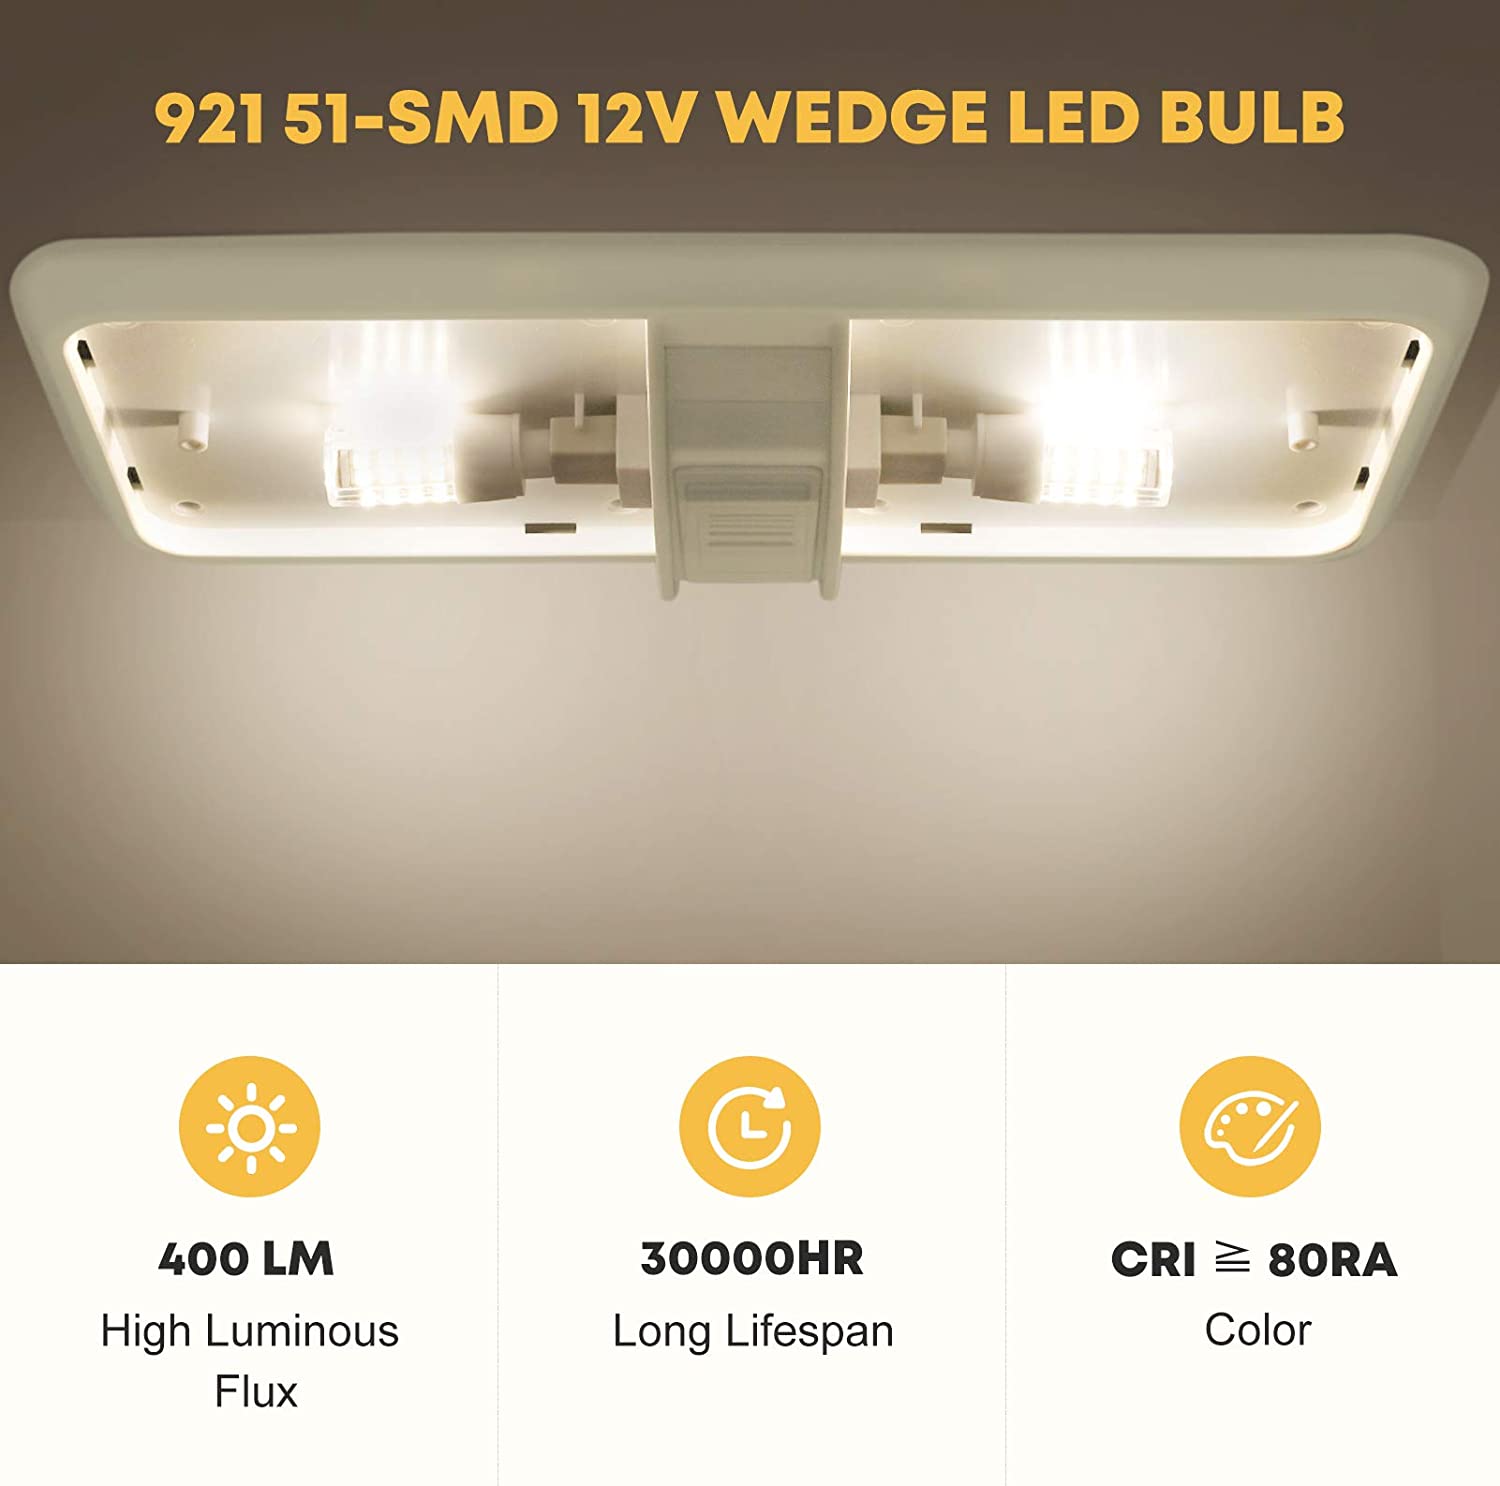 Superior RV 921-15W2835A Wedge LED Light Bulb - Frosted - 921 - 2-Pack